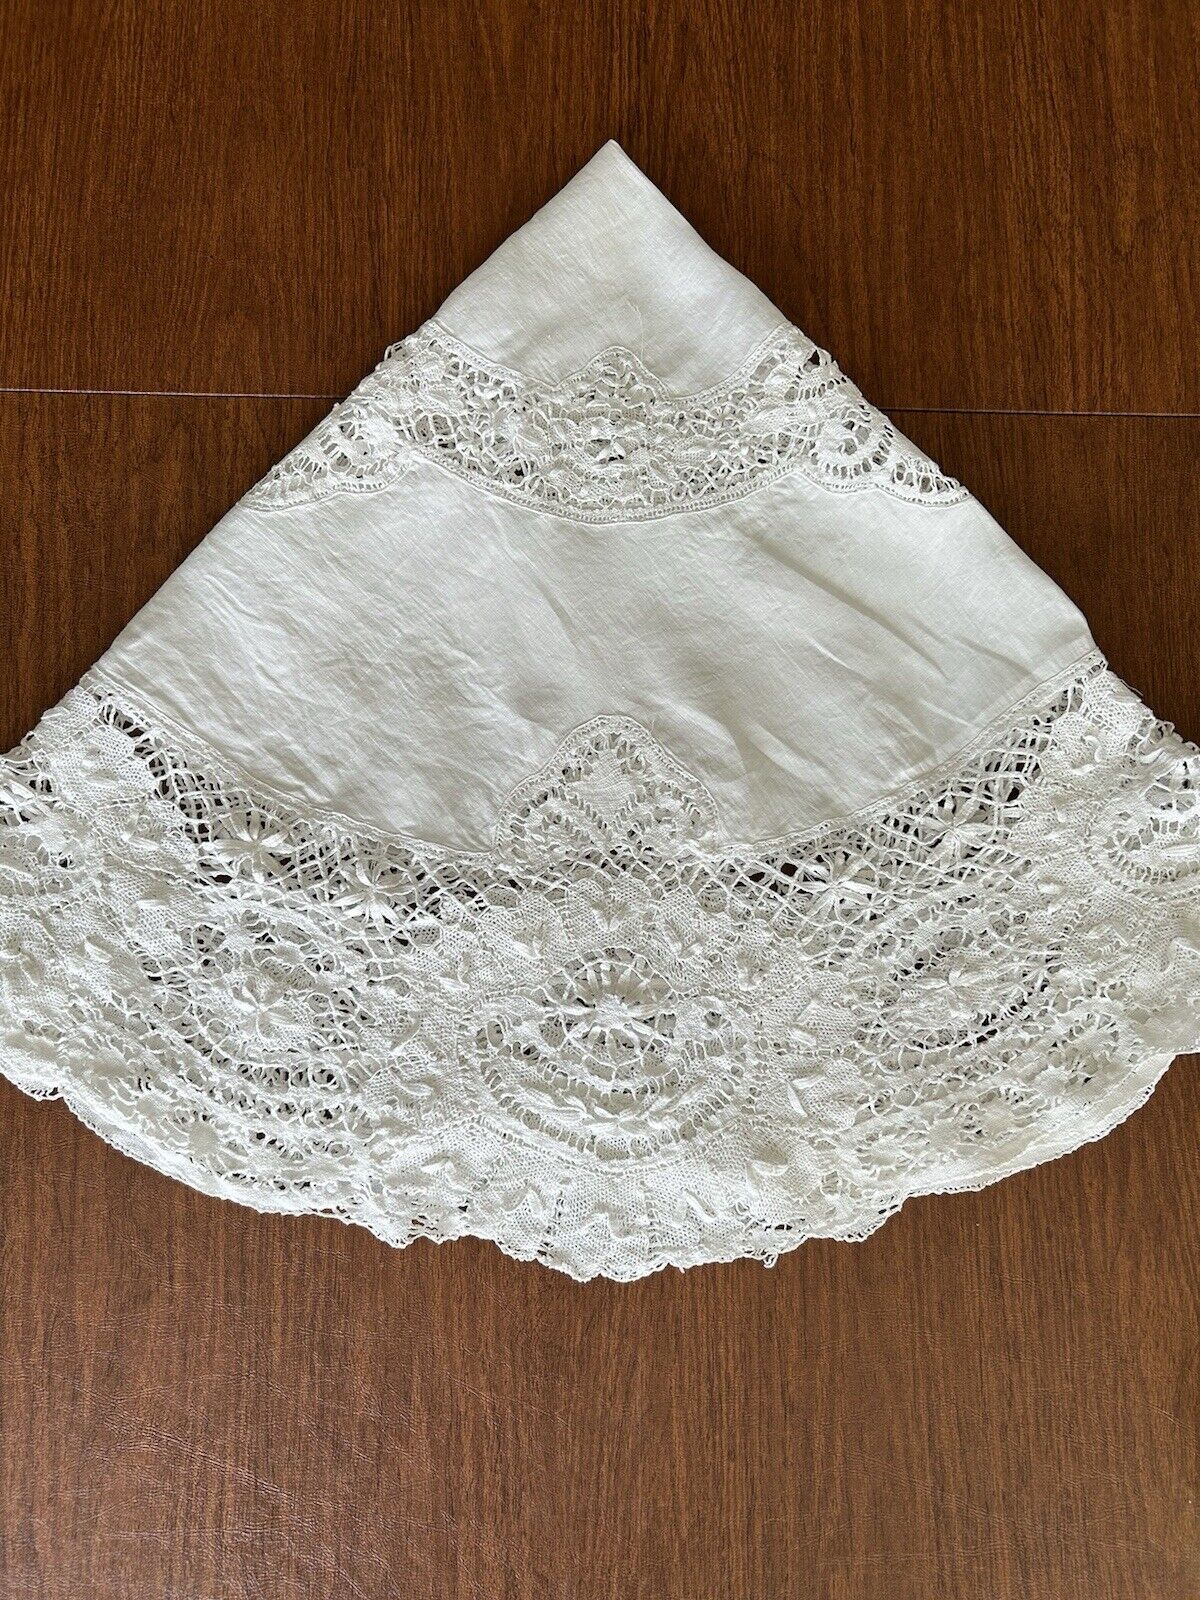 Vintage Cotton Tablecloth With Delicate Crochet Design. 47” Round